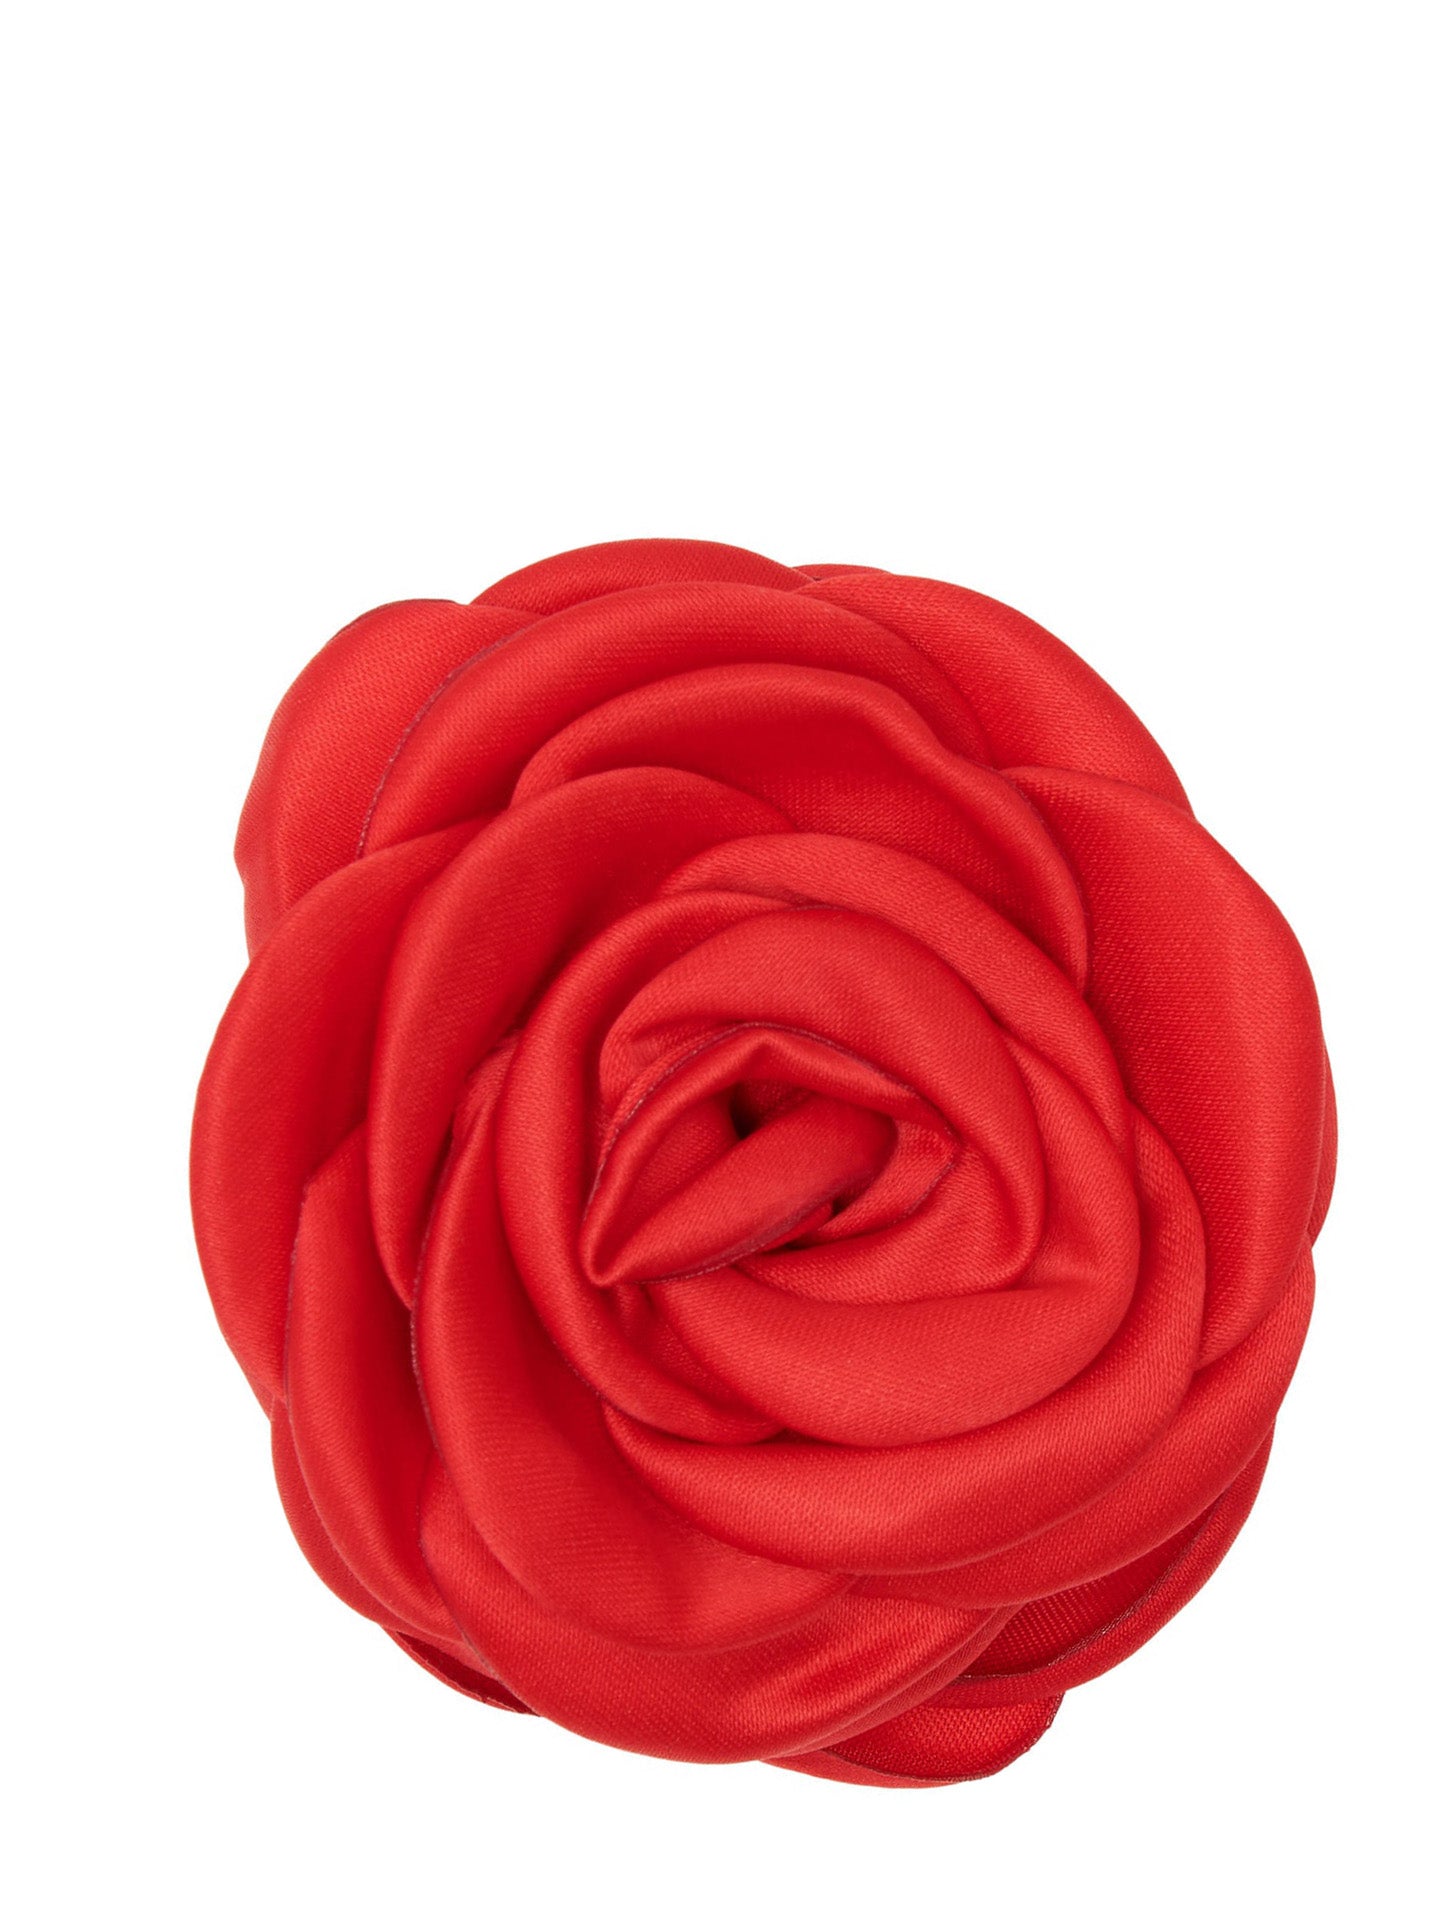 Small Satin Rose Claw, Bright Red